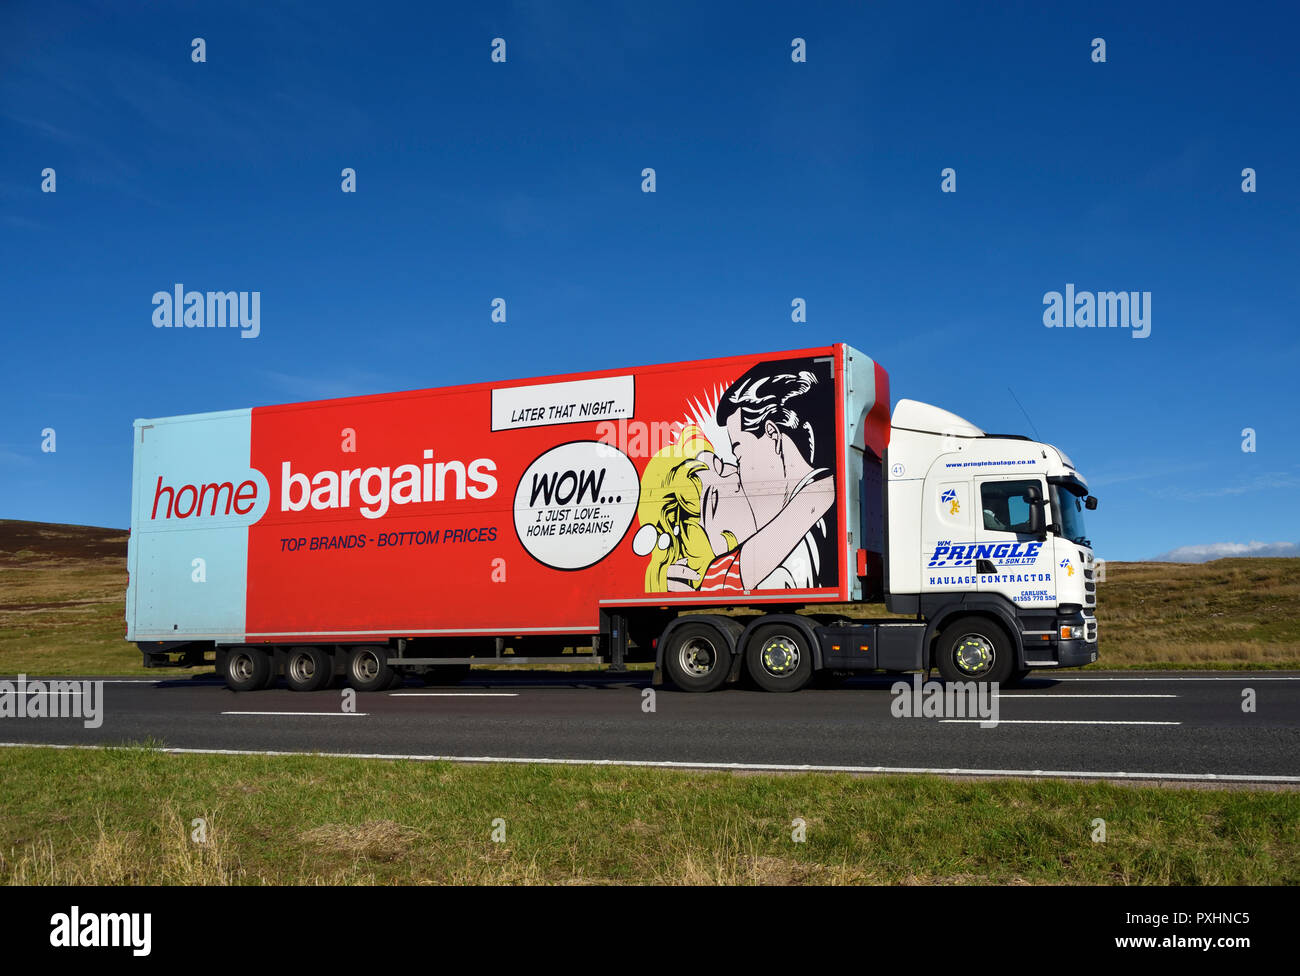 Home Bargains Trailer hauled by Wm.Pringle & Son Limited HGV. M6 motorway Southbound carriageway, Shap, Cumbria, England, United Kingdom, Europe. Stock Photo